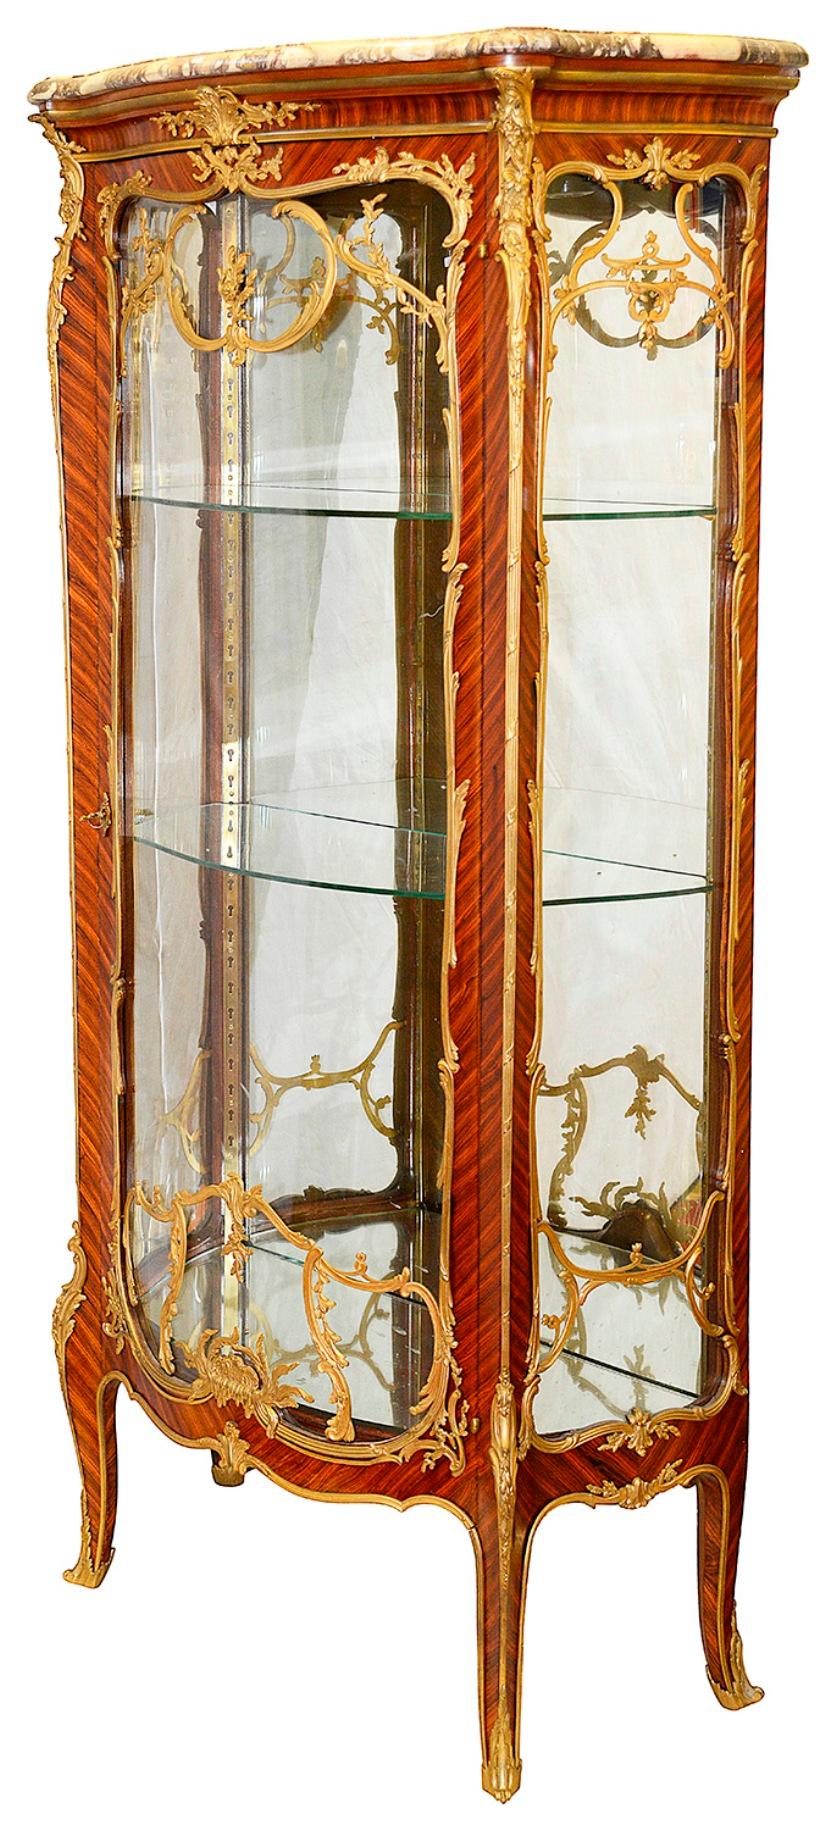 A wonderful and rare pair of late 19th century French Louis XVI style virtines, each with their original marble tops, beautiful scrolling gilded ormolu mounts, the serpentine fronted glass doors open to reveal adjustable glass shelves within.